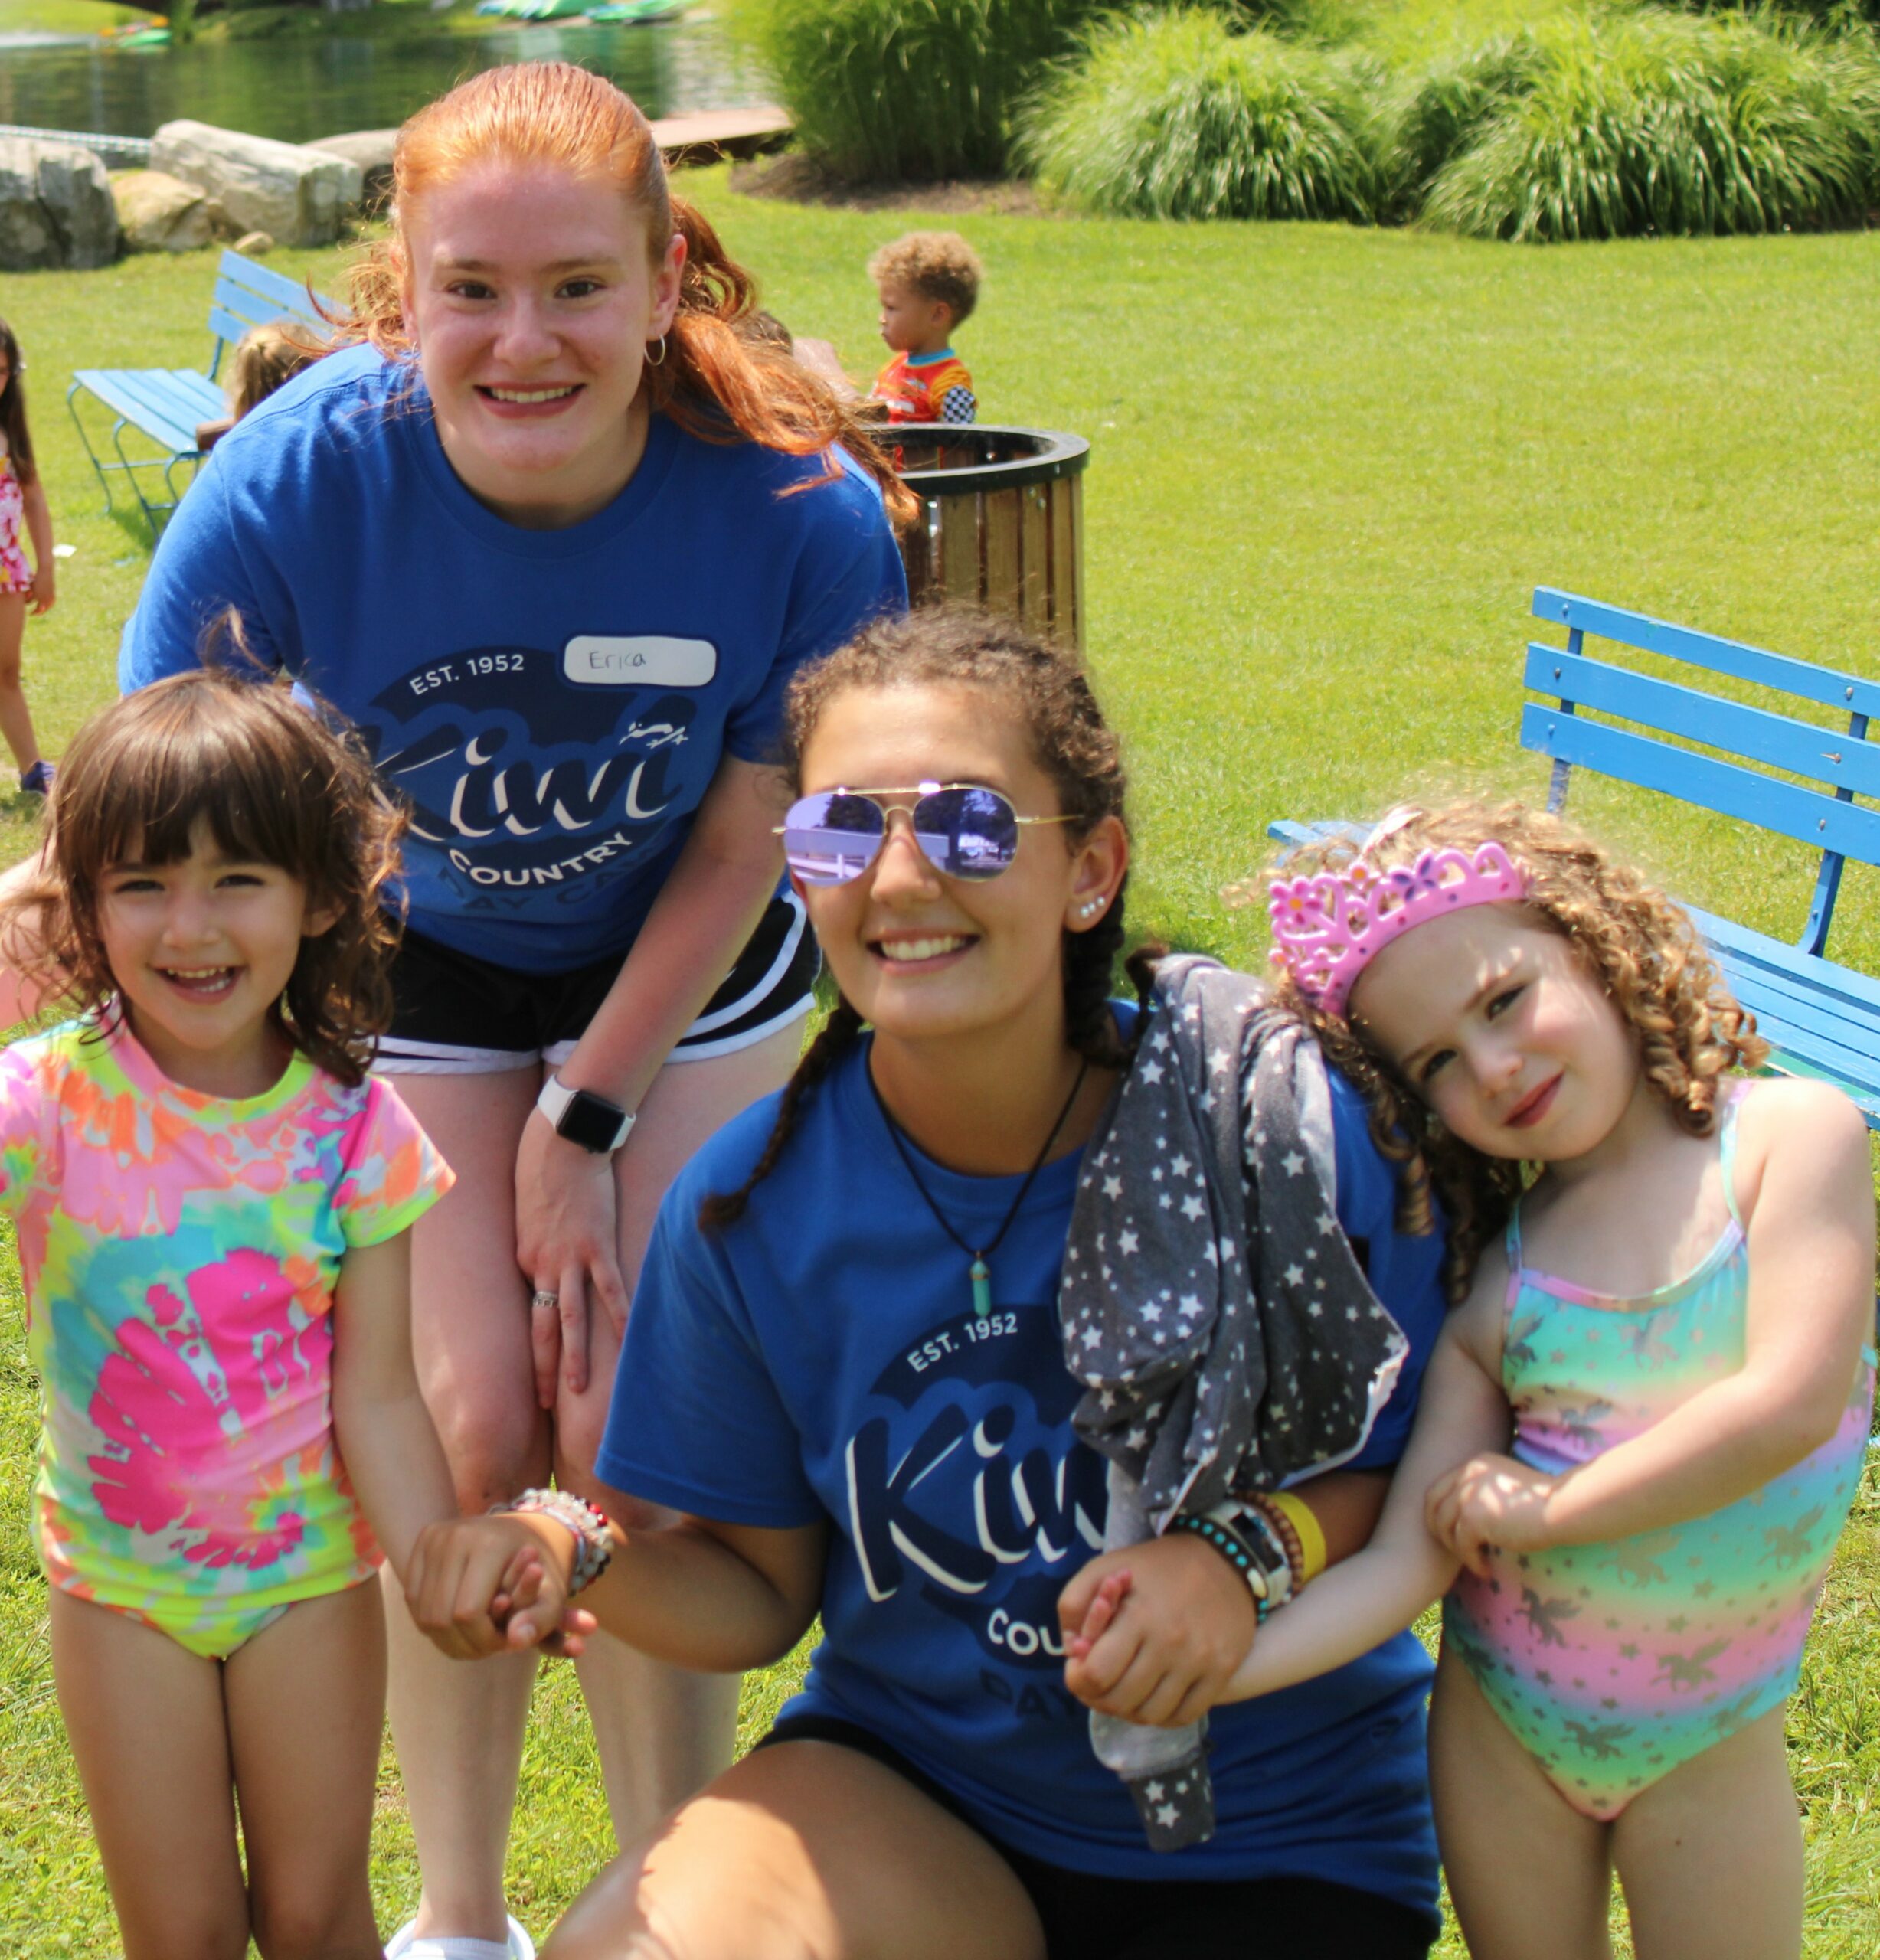 TEAM Members | Kiwi Country Day Camp